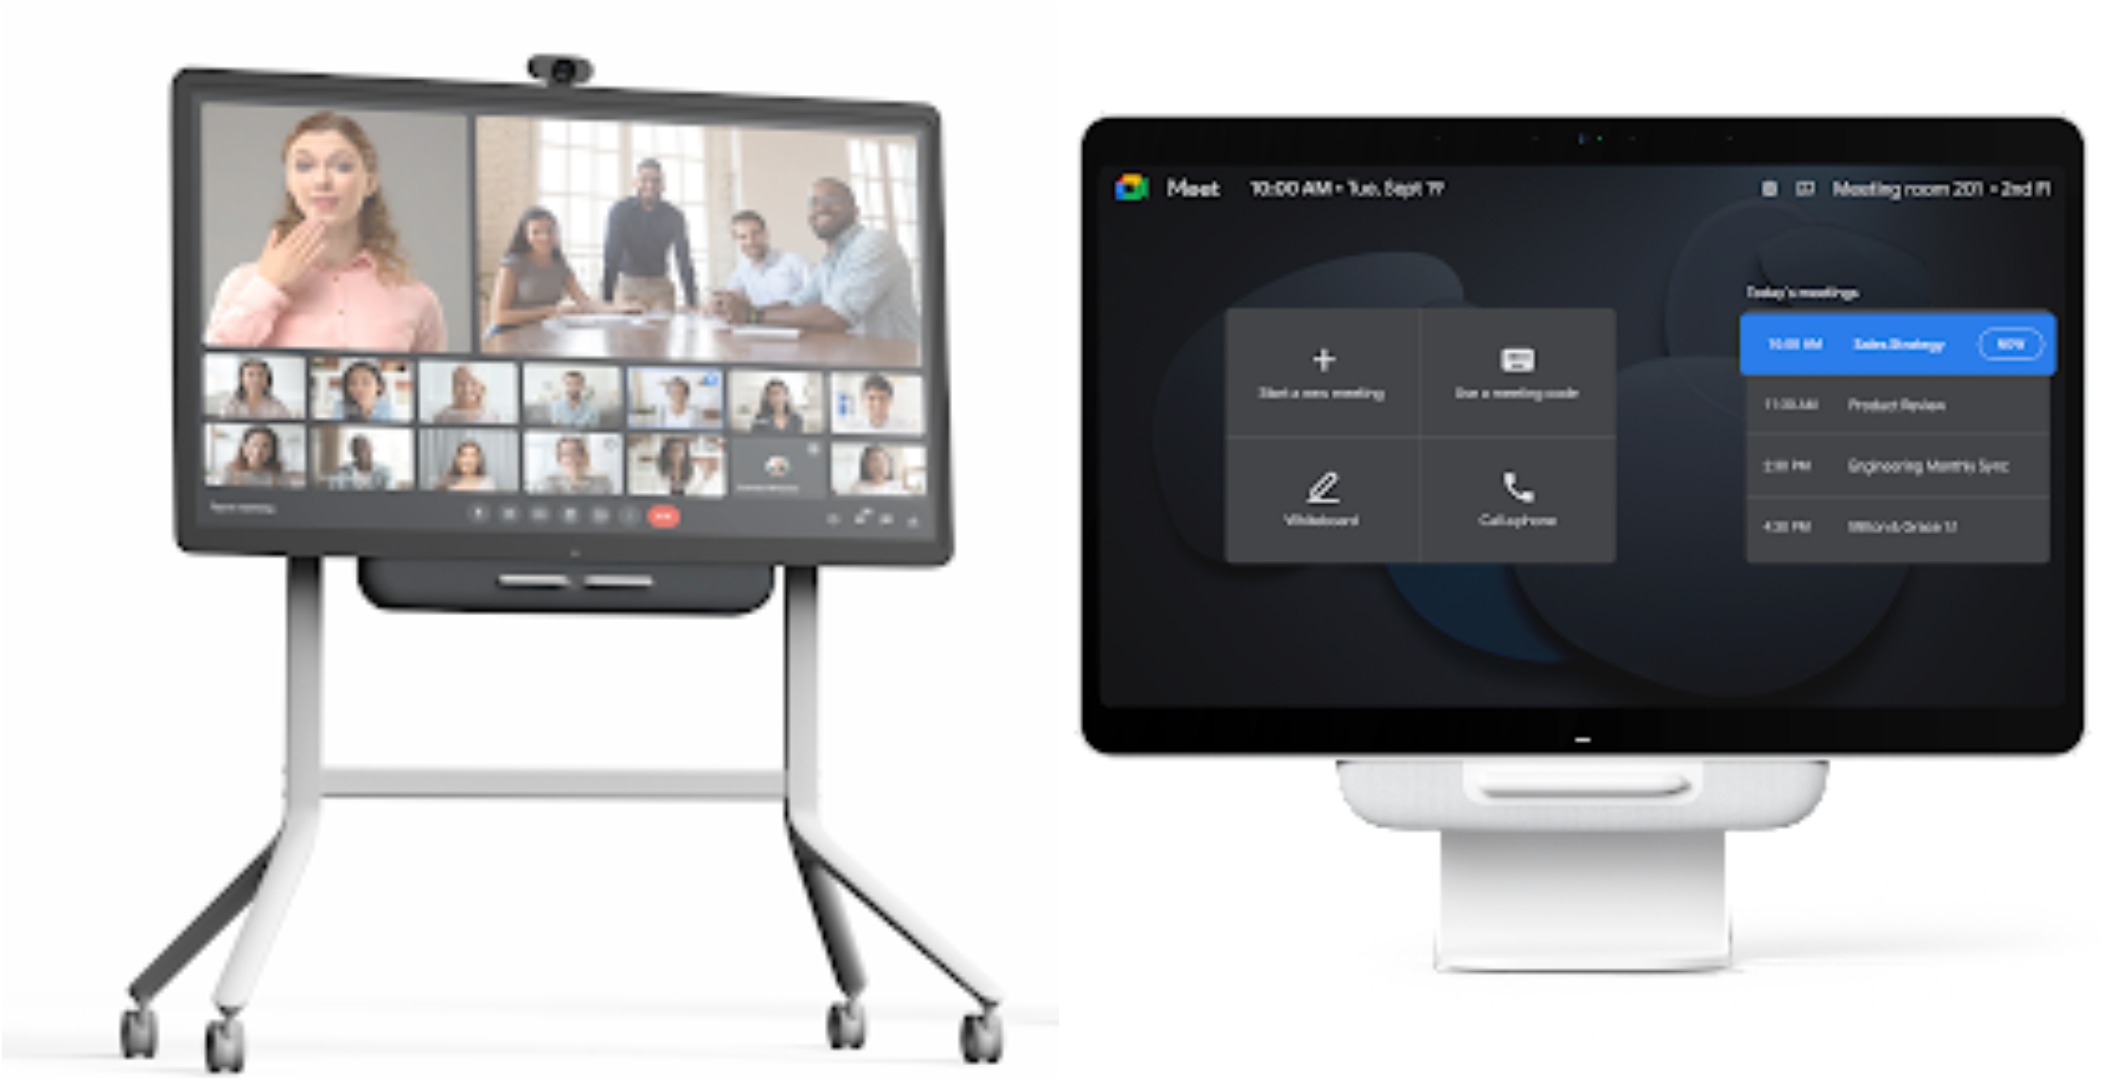 You can now use your Google Meet hardware displays as digital signage